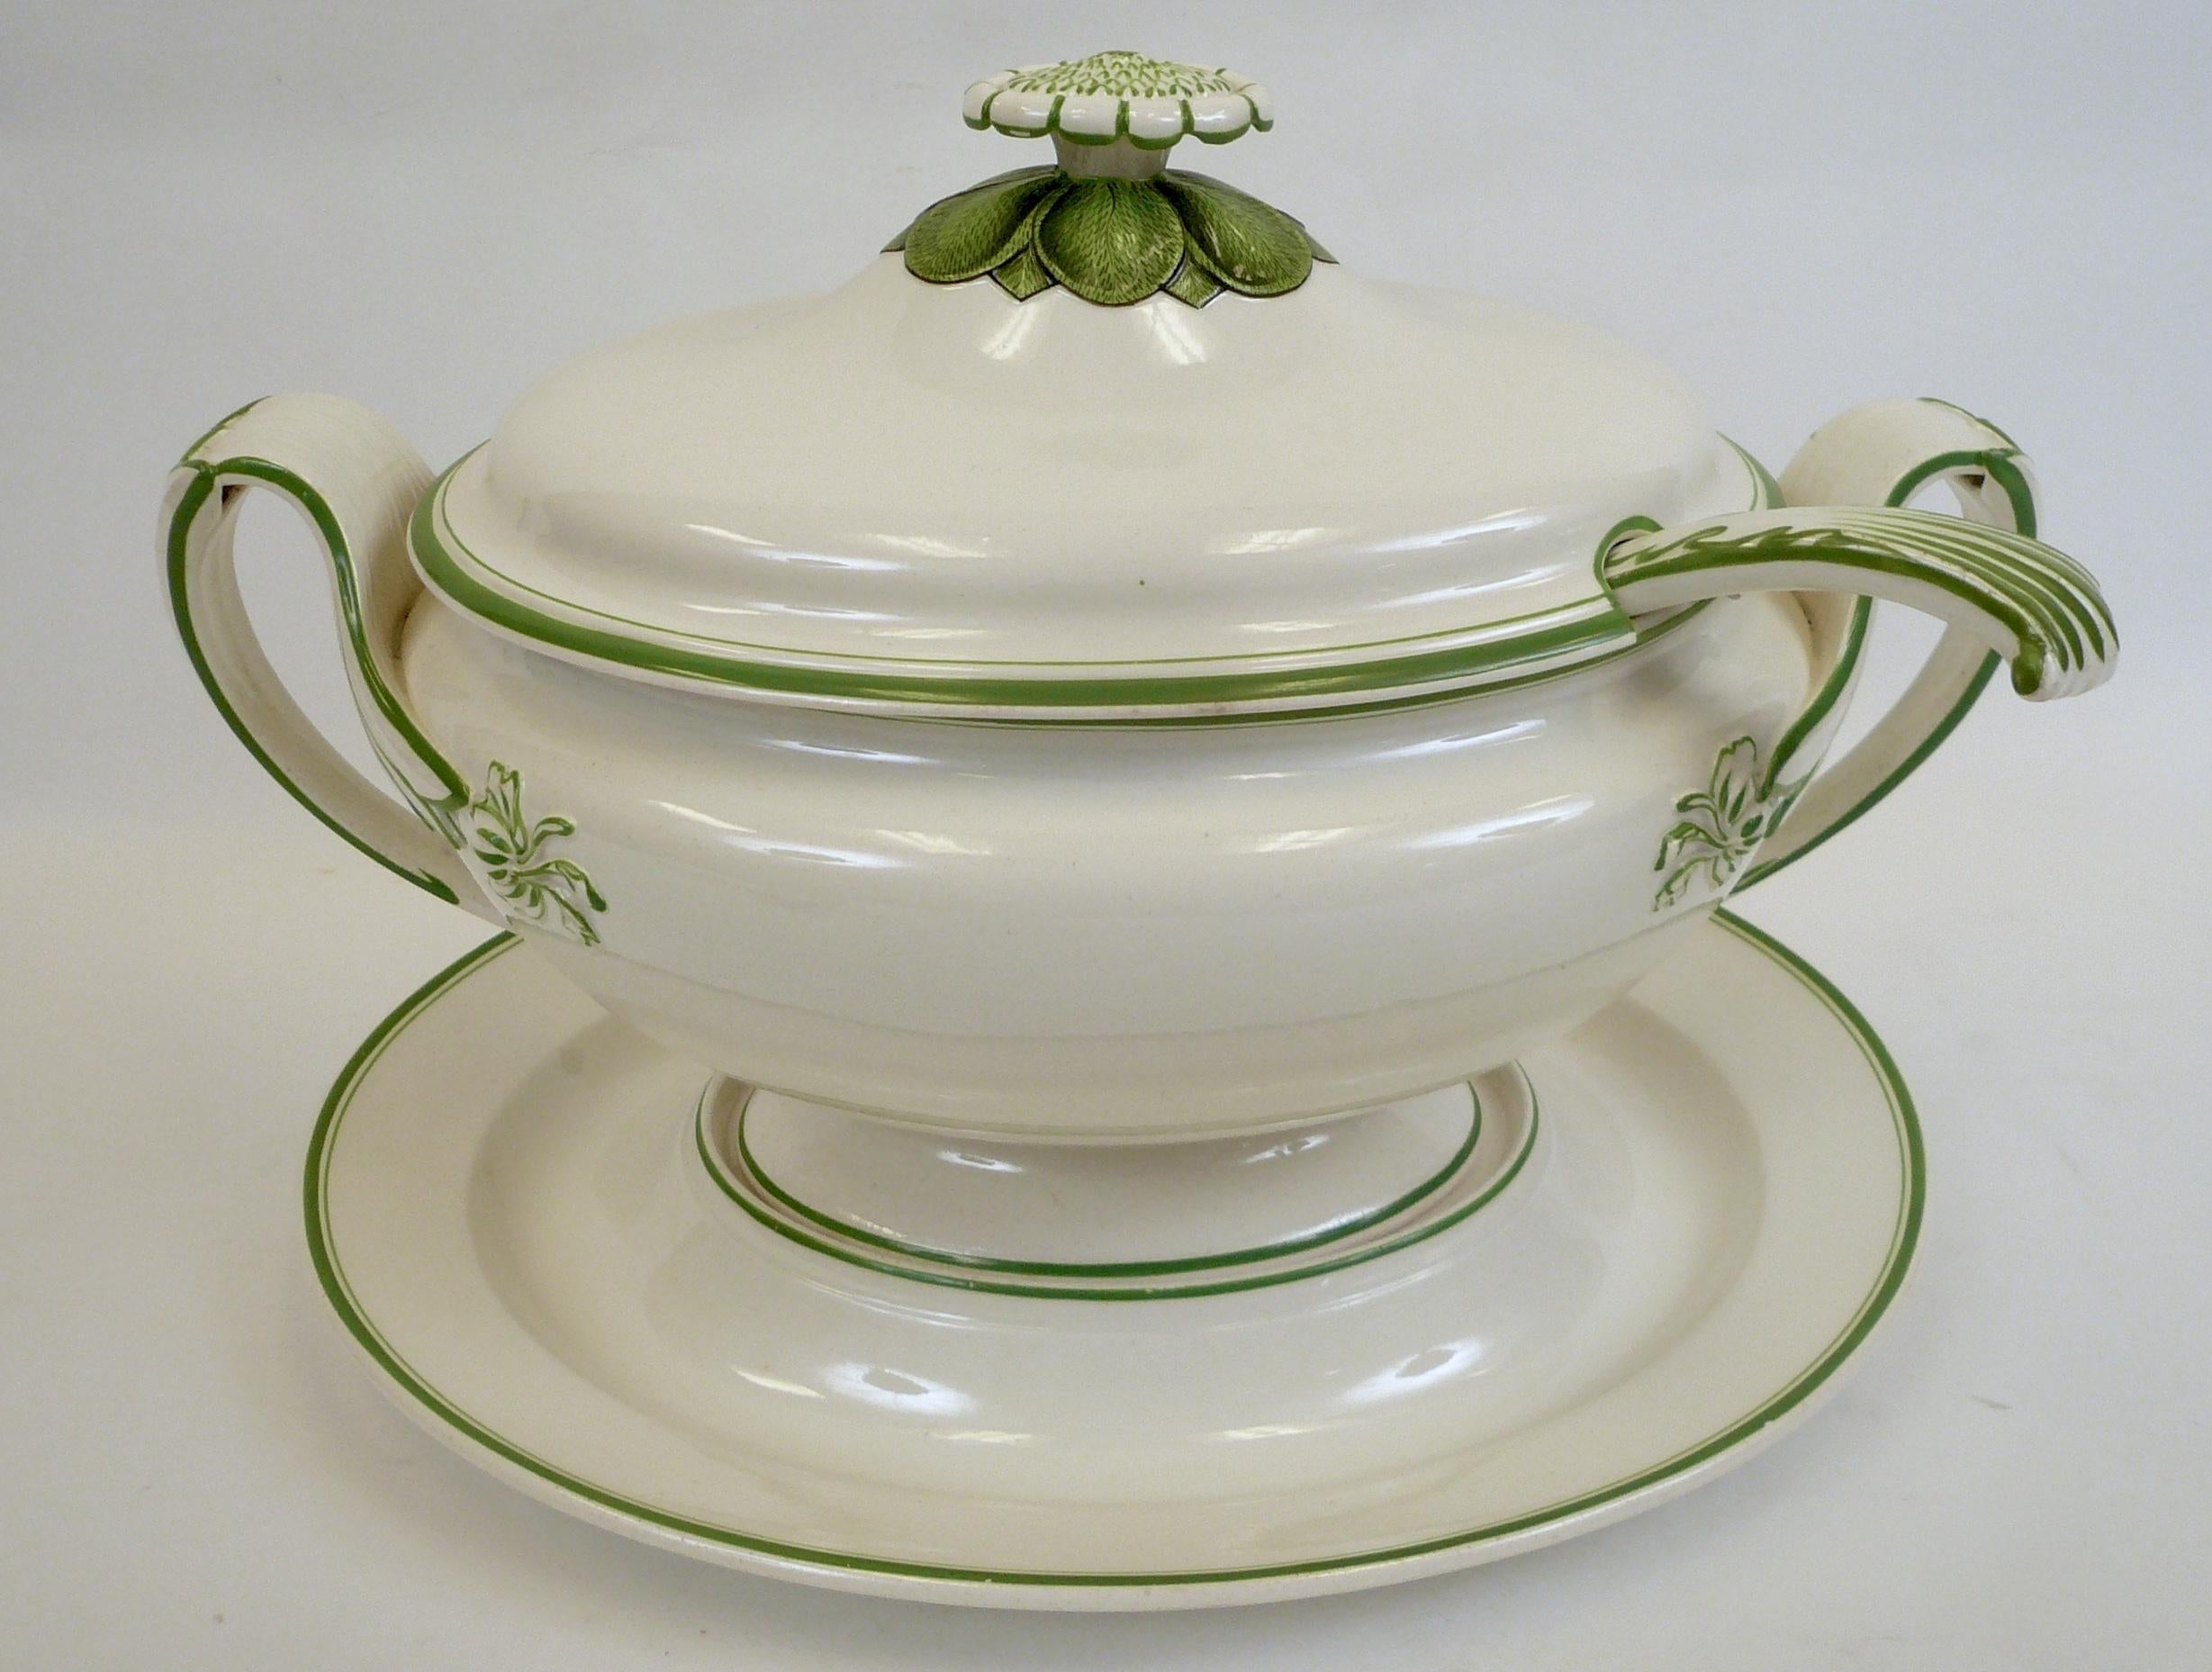 Creamware is a cream colored refined earthenware first produced in the mid-18th century, and perfected by Wedgwood in the 1760s. This tureen is in the Classic Wedgwood shape, and features acanthus leaves, and an artichoke finial. It consists of four